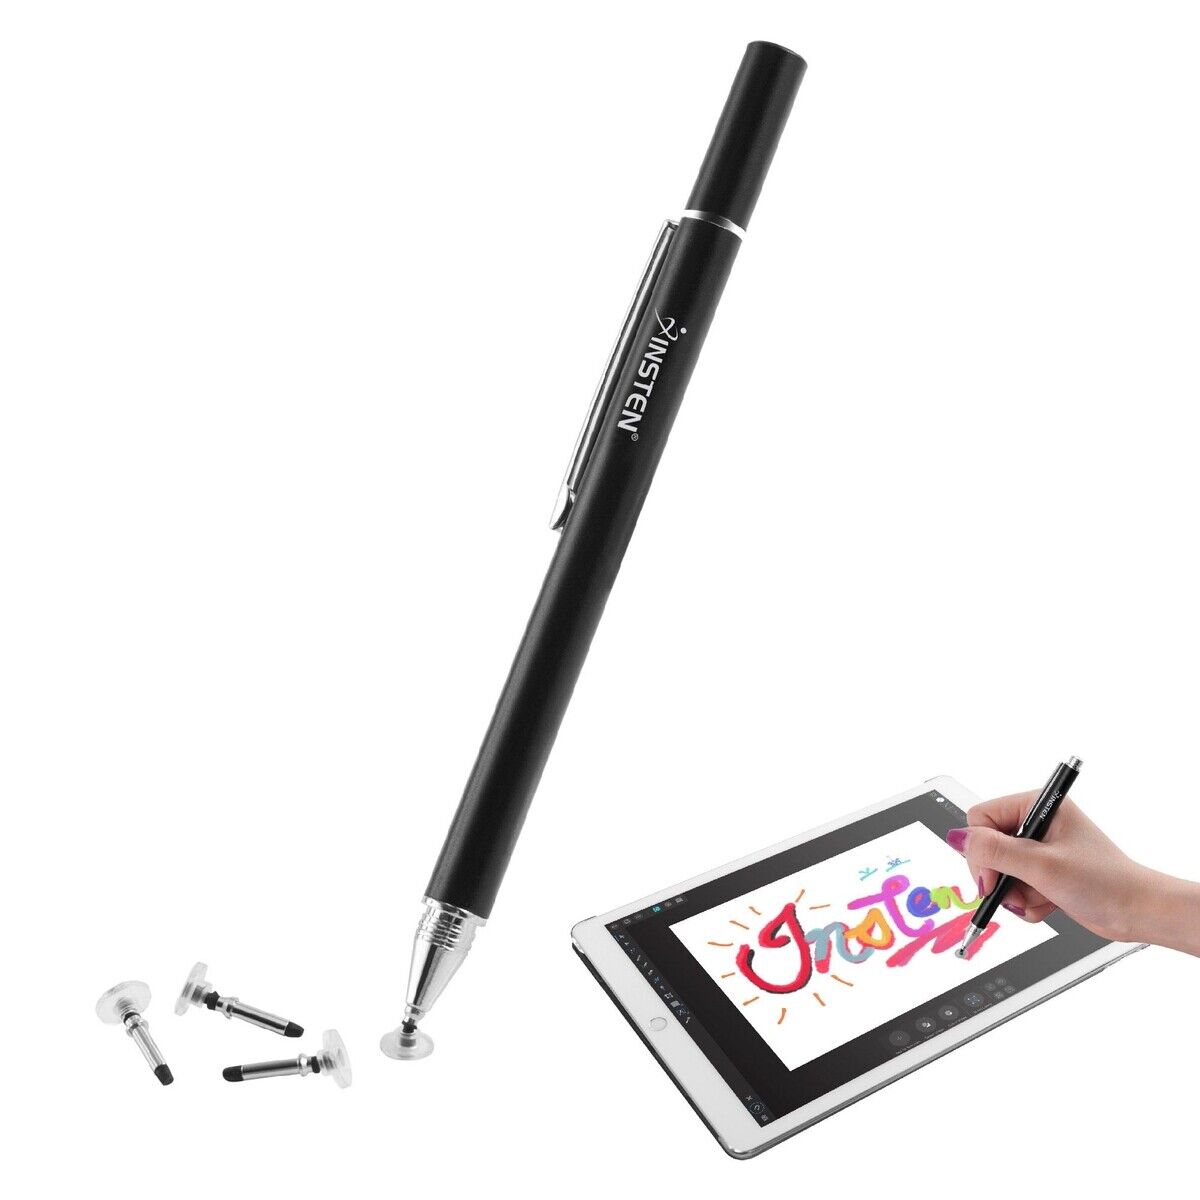 Universal Capacitive Tip Touch Screen Stylus Drawing Pen For iPad Tablet - Black